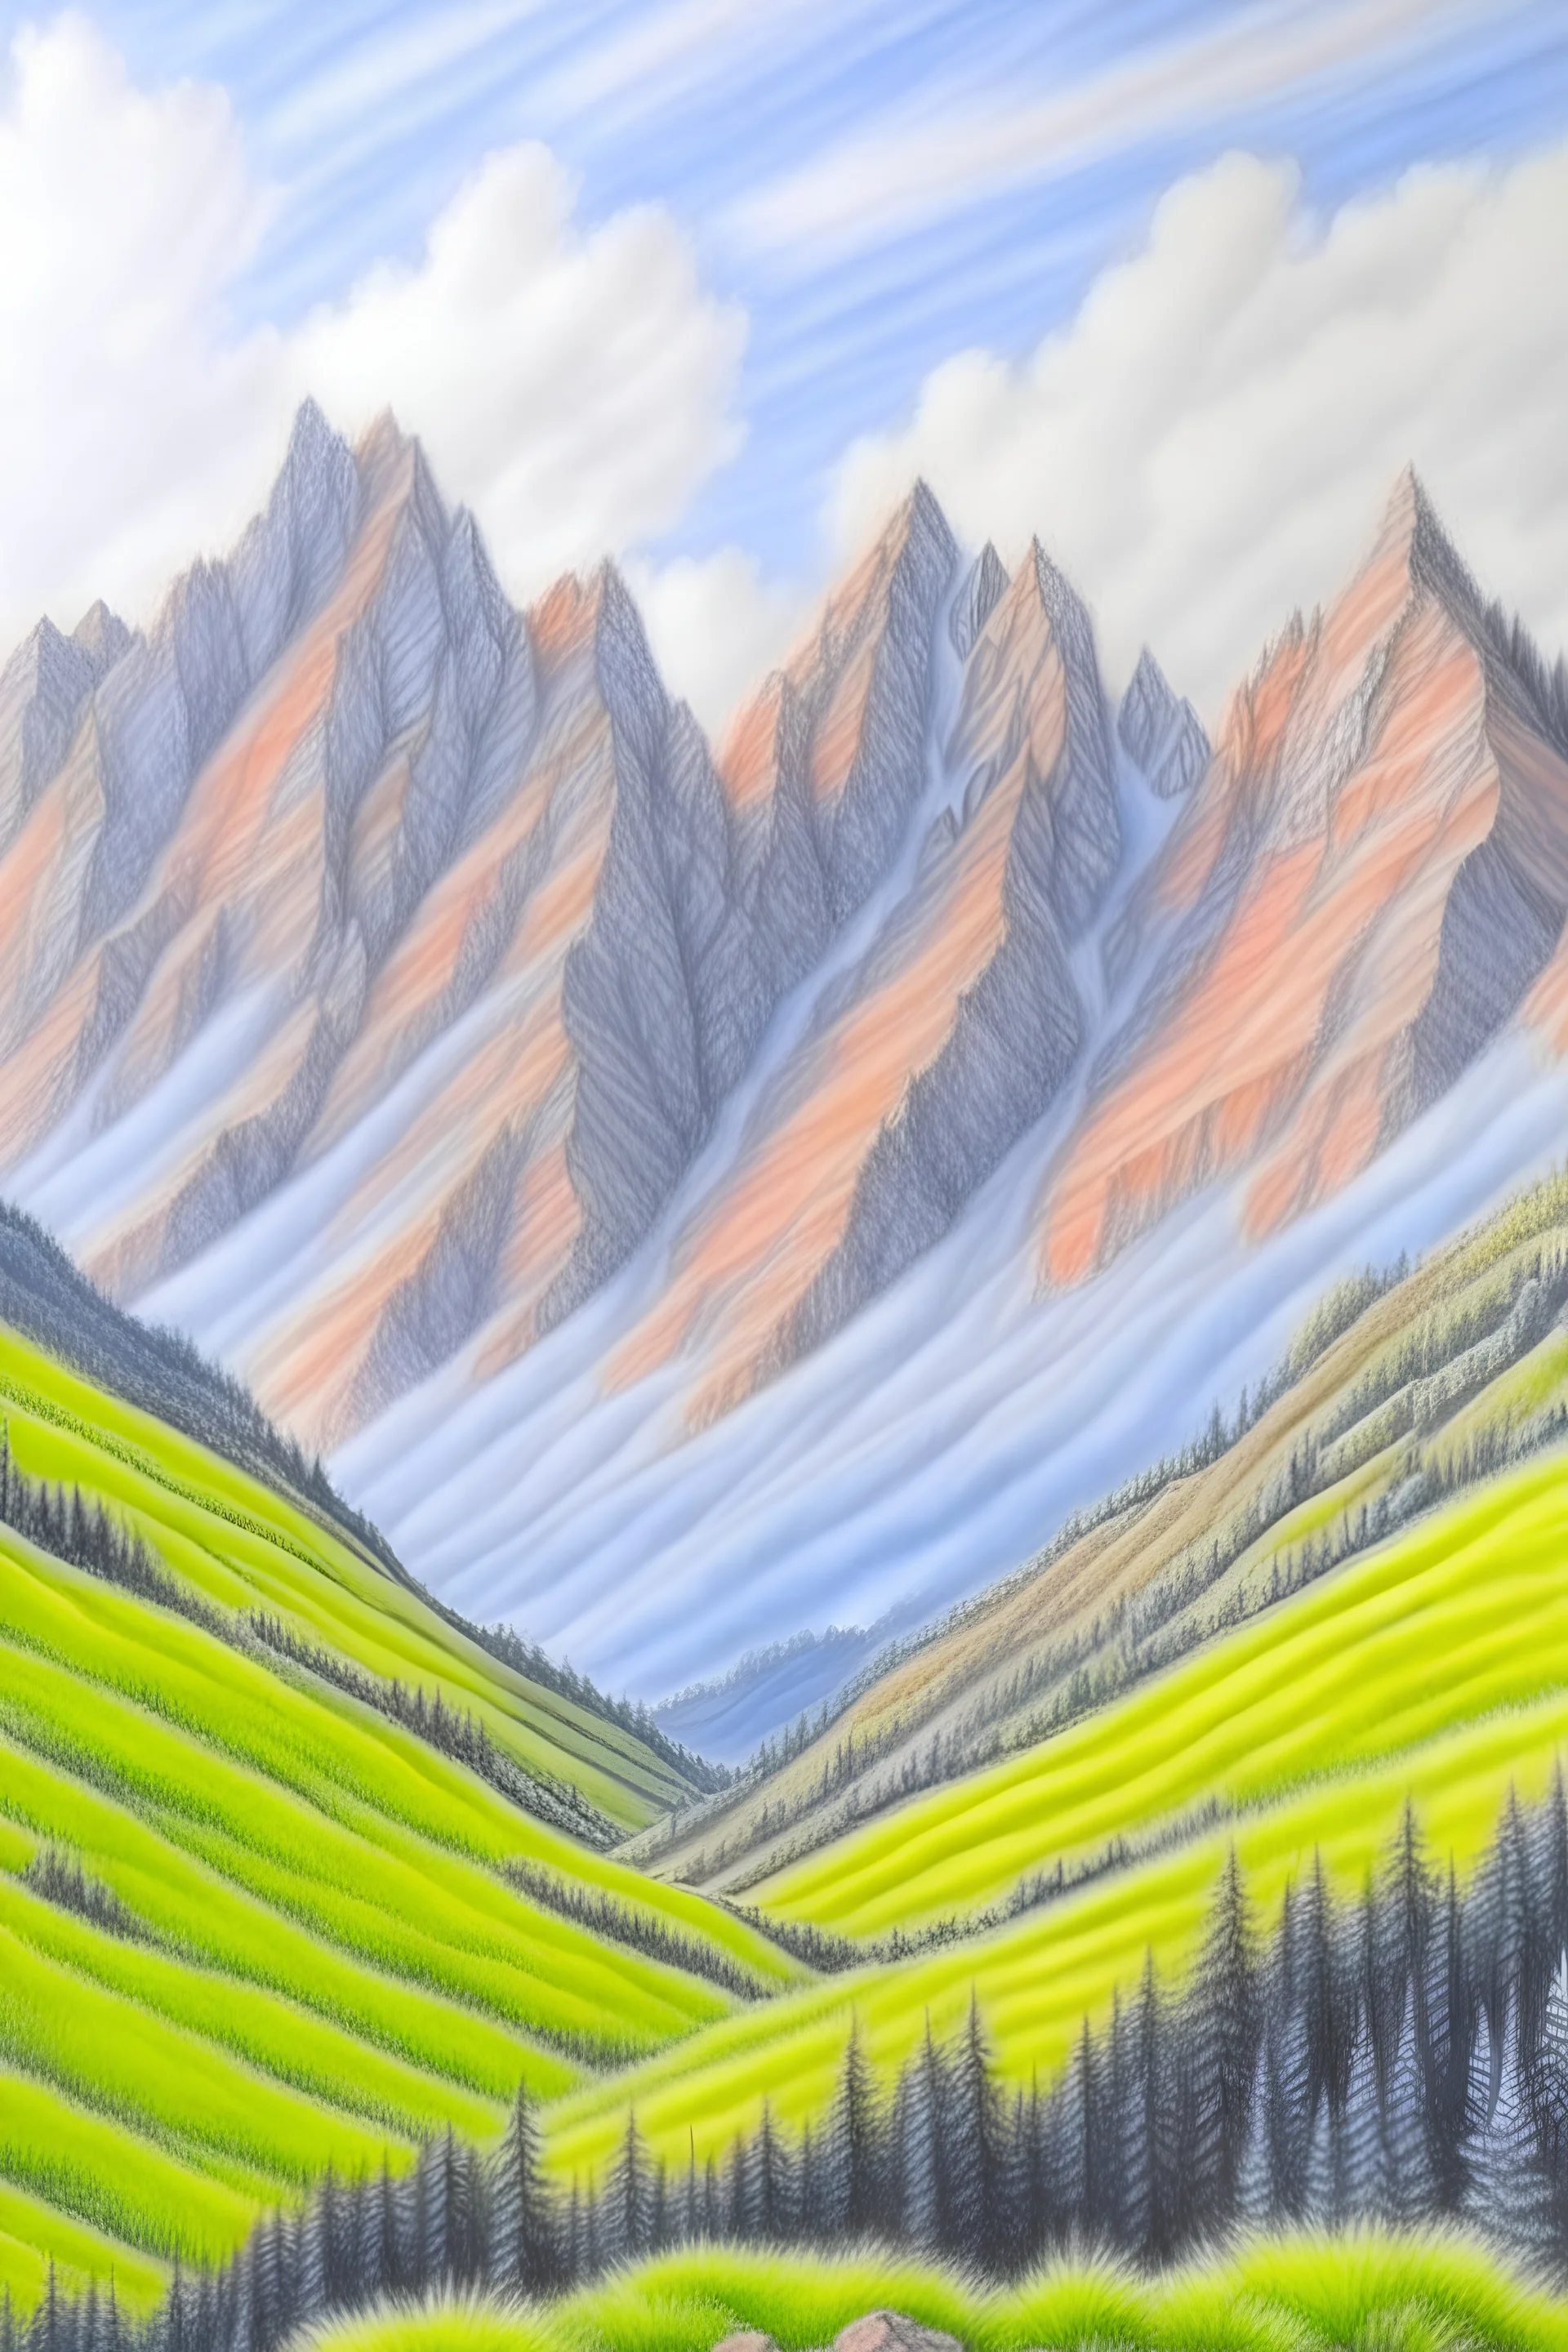 Mountain Landscape Drawing. 7 Tips that Make it Fun & Easy